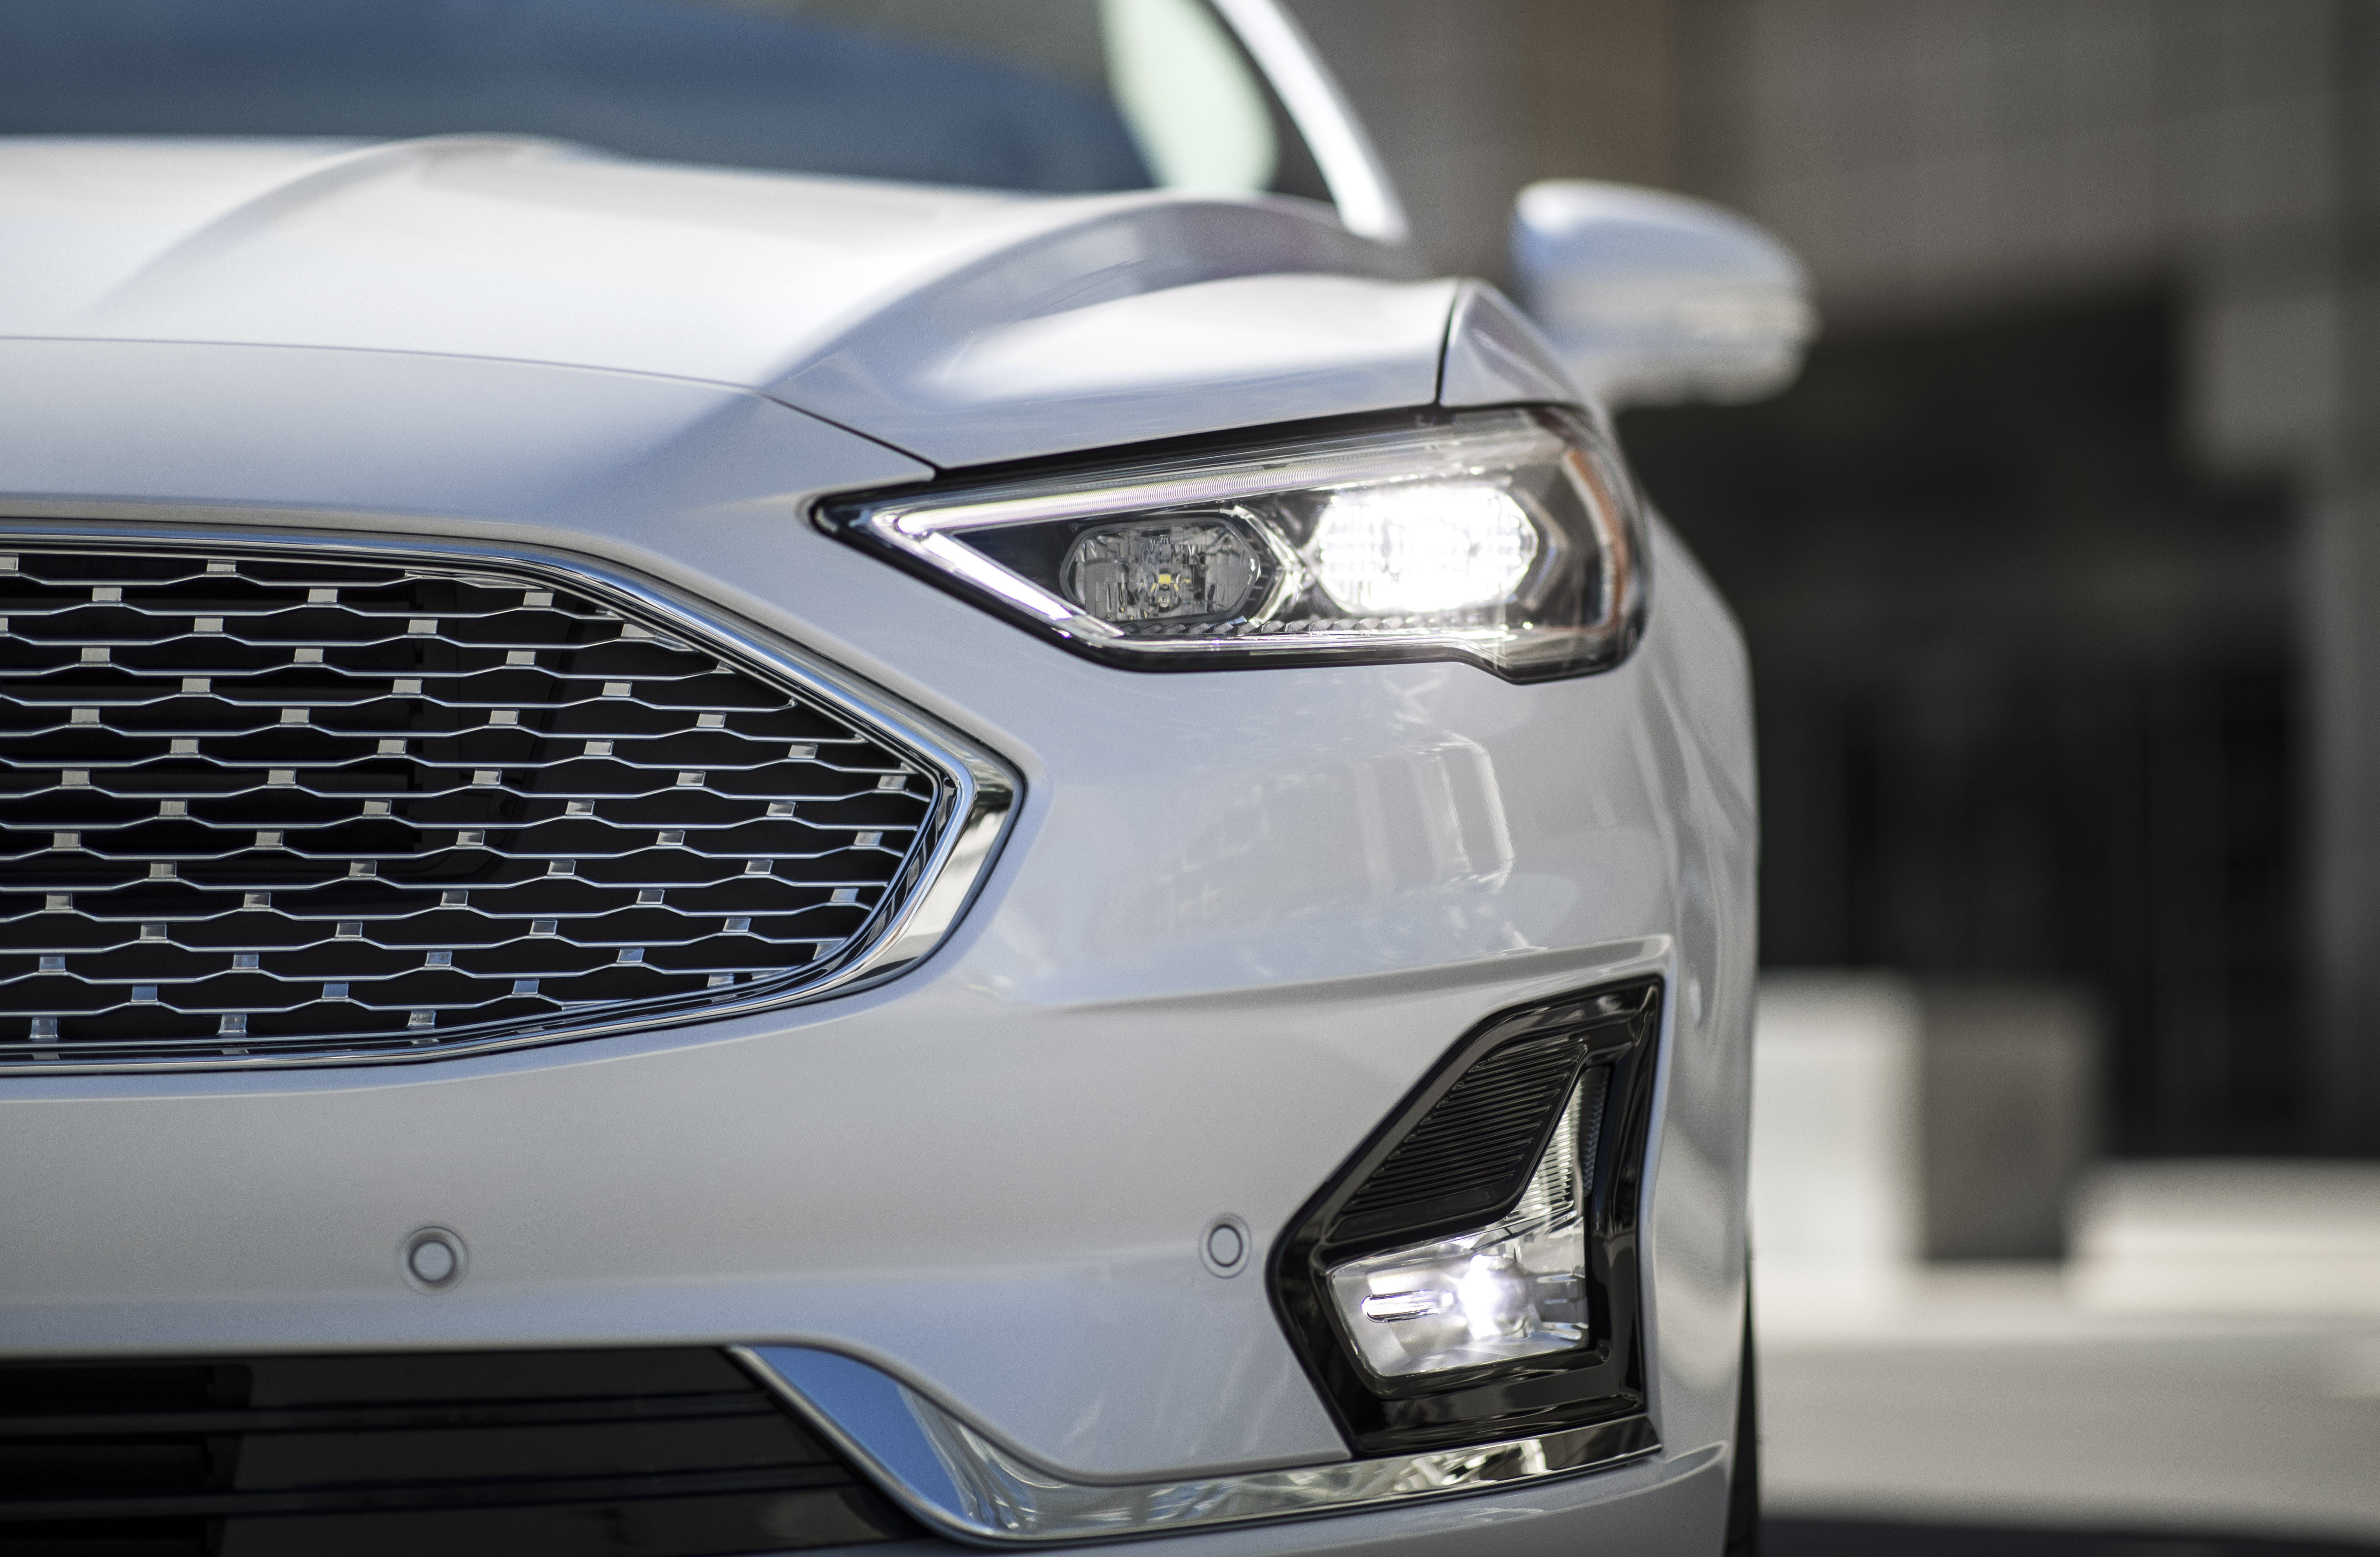 Sleeker, Smarter 2019 Fusion Is First Ford with Standard Ford Co-Pilot360  Driver-Assist Technology, Greater Plug-In Hybrid Range | Ford Media Center